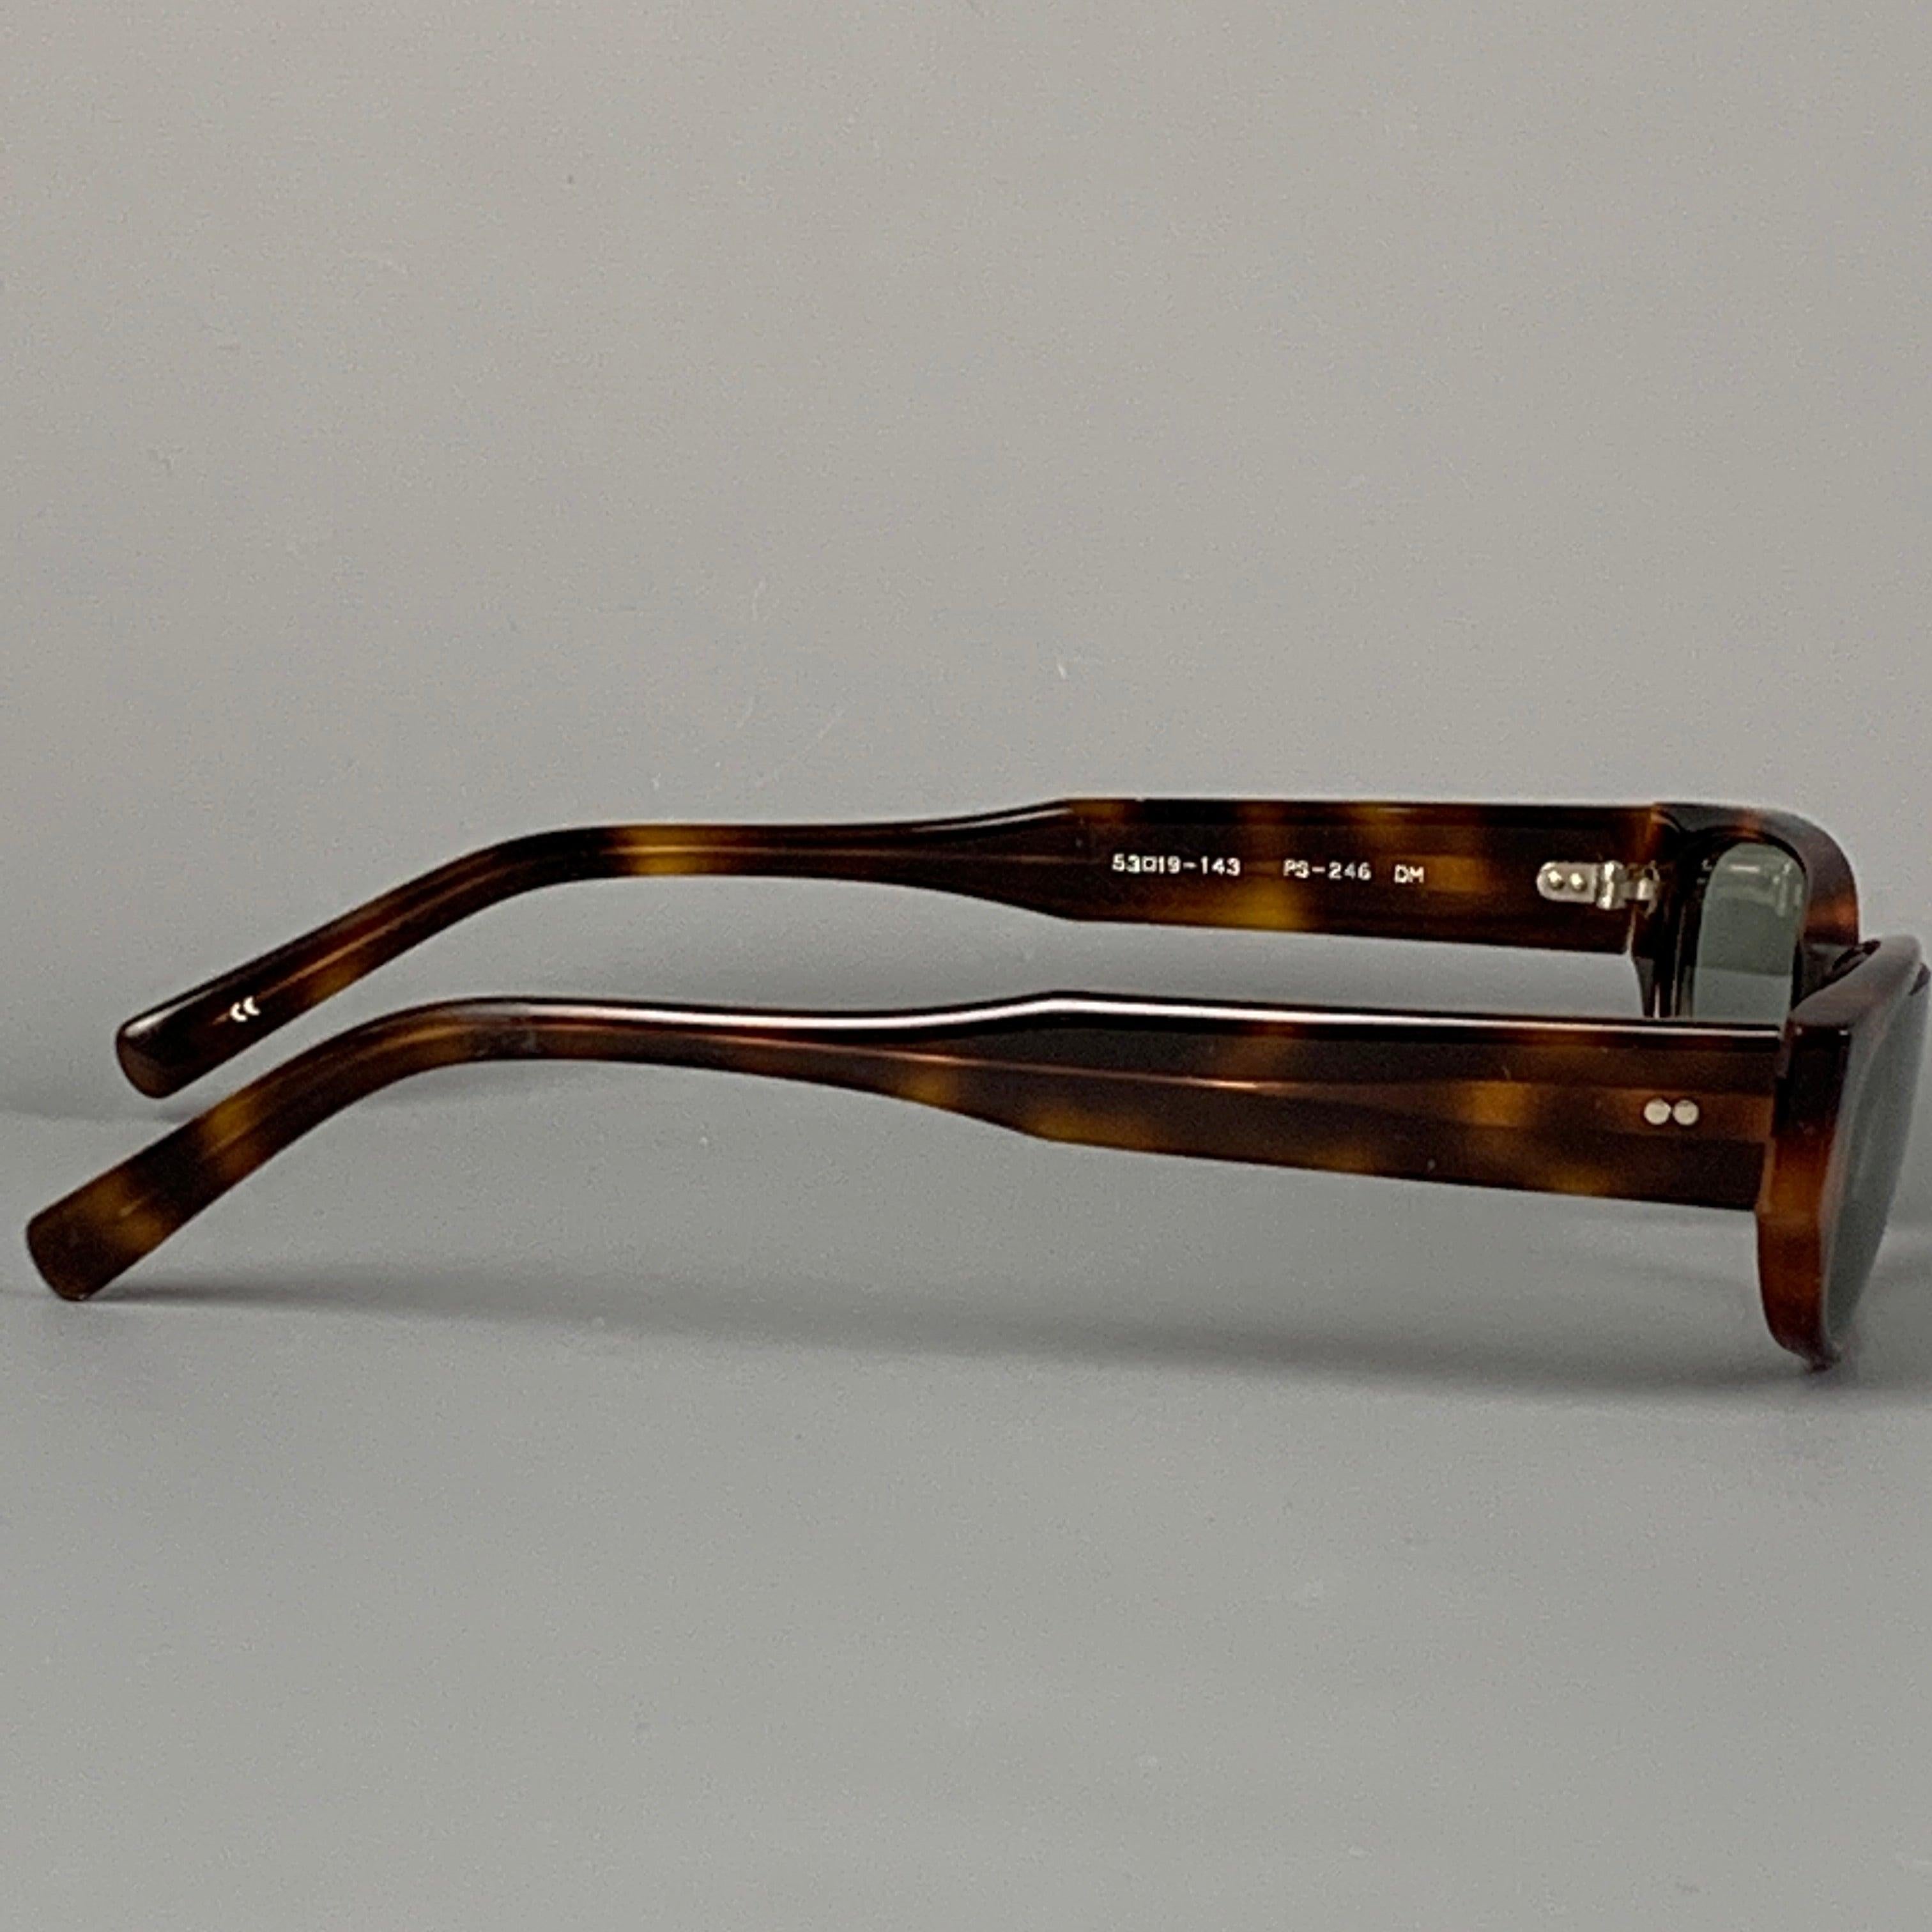 PAUL SMITH sunglasses comes in a brown tortoise shell acetate featuring tinted lenses. Made in Japan.
Good
Pre-Owned Condition. 

Marked:   53-19-143 PS-246 DM  

Measurements: 
  Length: 14 cm. Height: 3 cm.
  
  
 
Reference: 81965
Category: